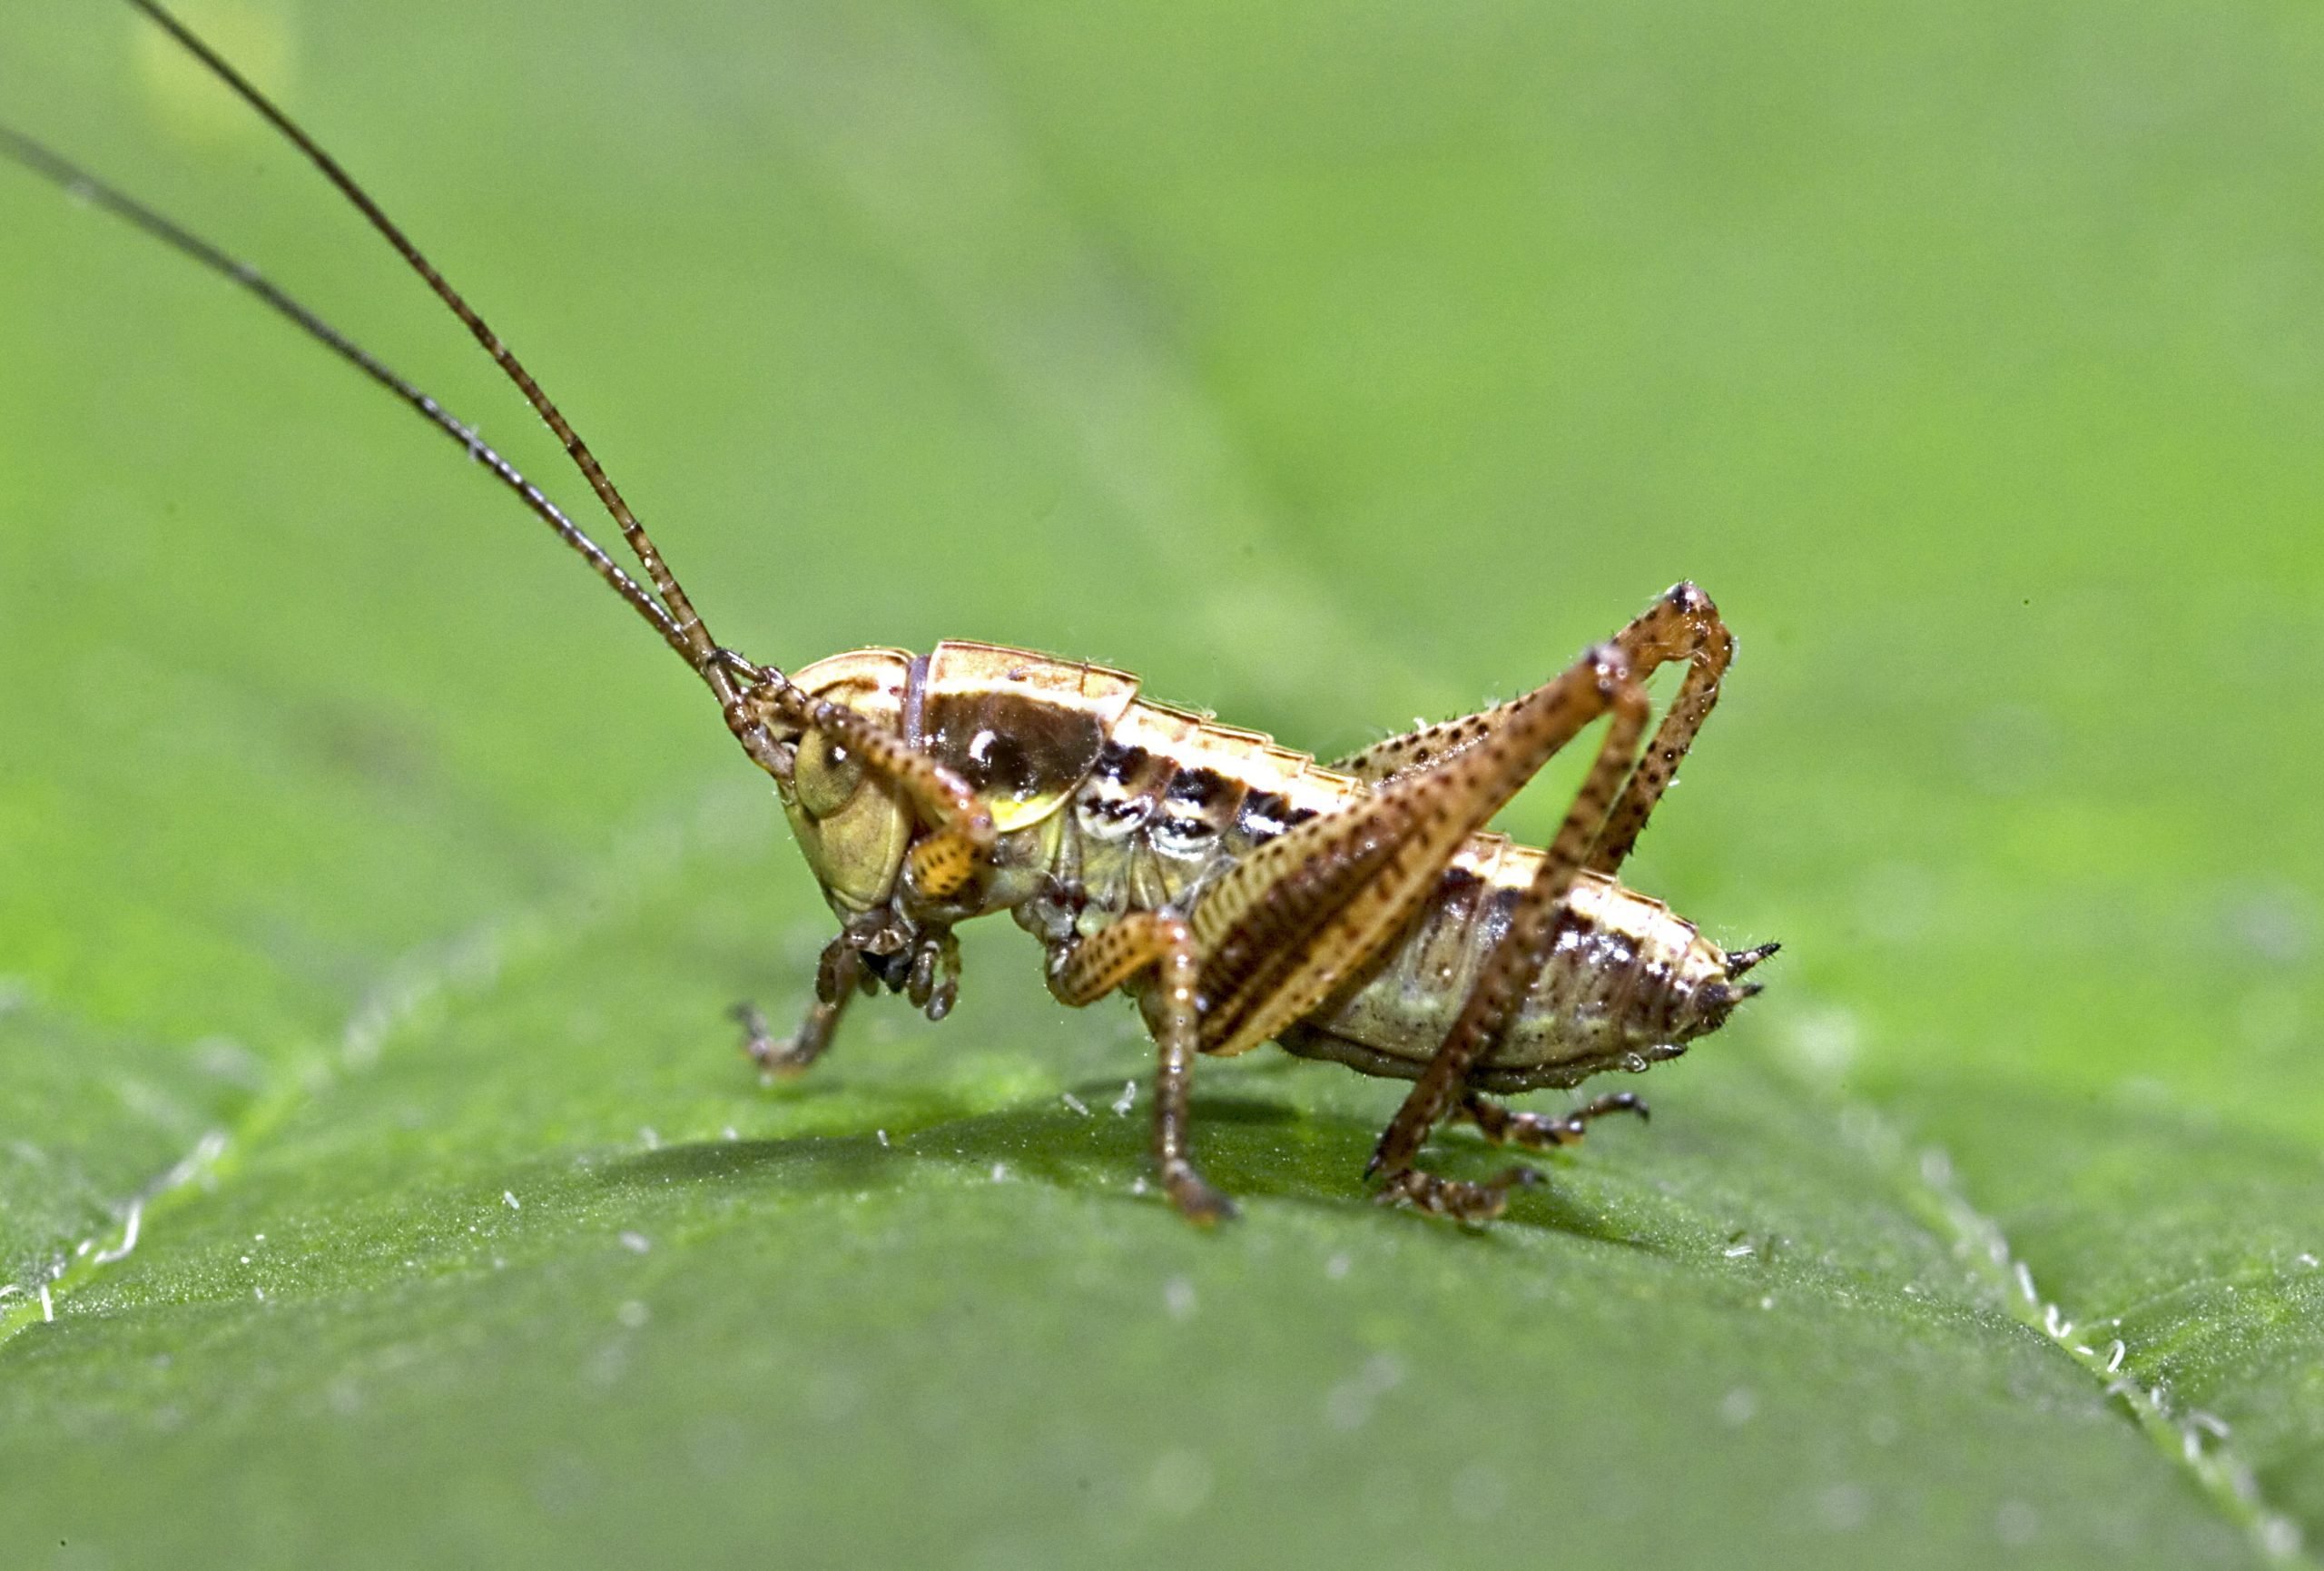 This Is How Bugs Can Make Such Loud Noises | Reader's Digest